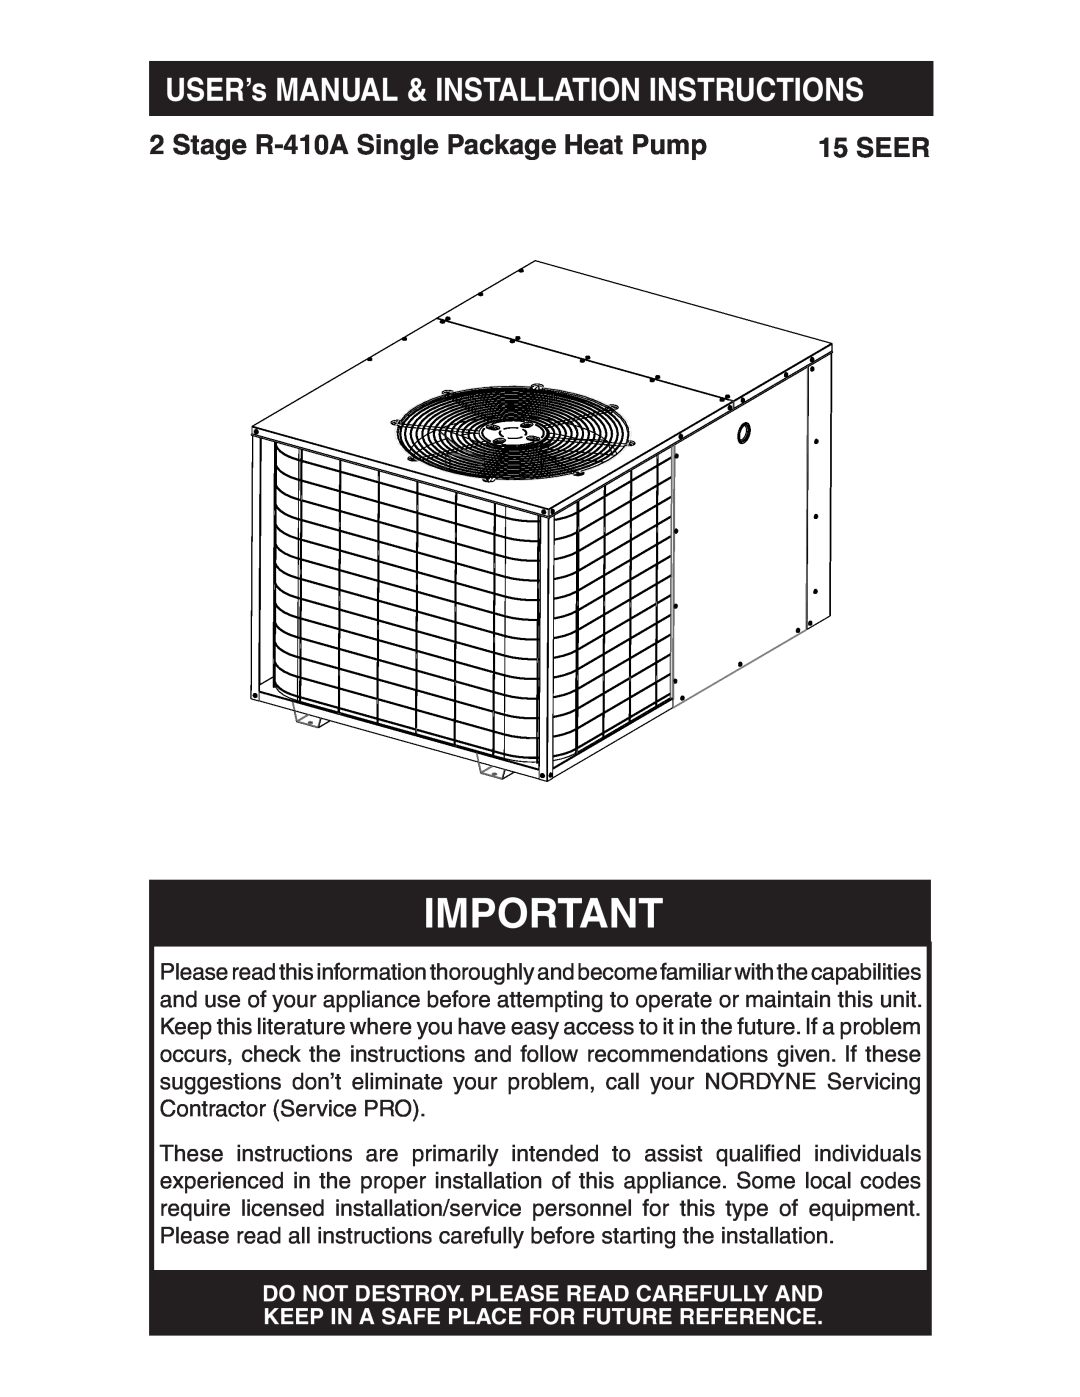 Nordyne user manual Outdoor Heat Pump, Do Not Destroy. Please Read Carefully And, Two Stage R-410ASplit System 